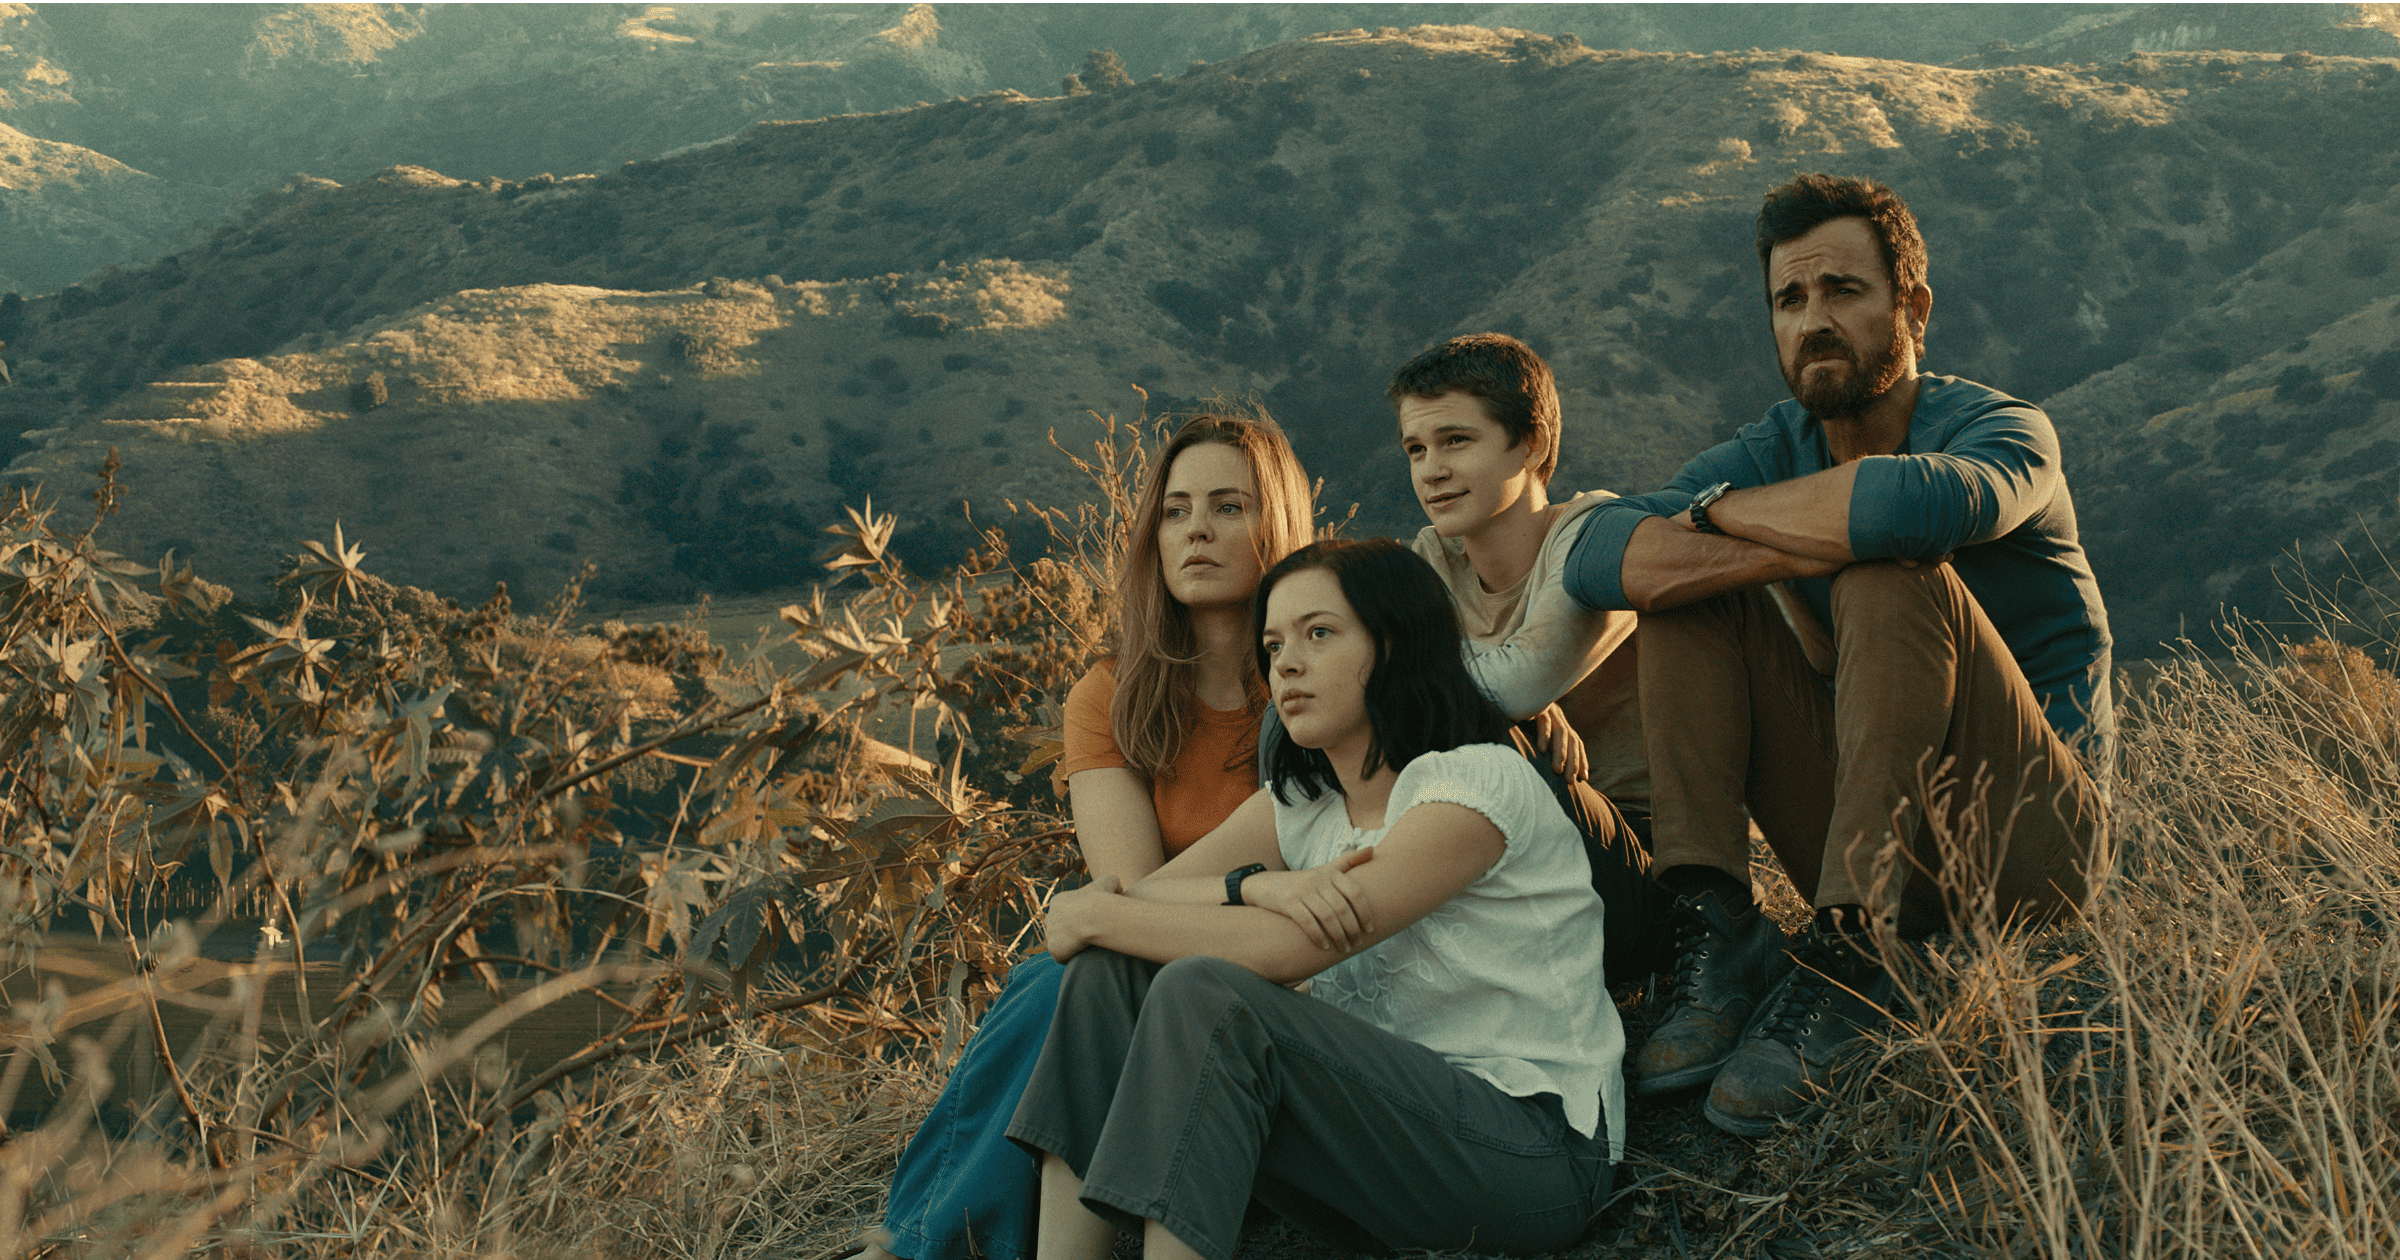 Review: ‘The Mosquito Coast’ Is a Hard Watch but Worth Sticking With